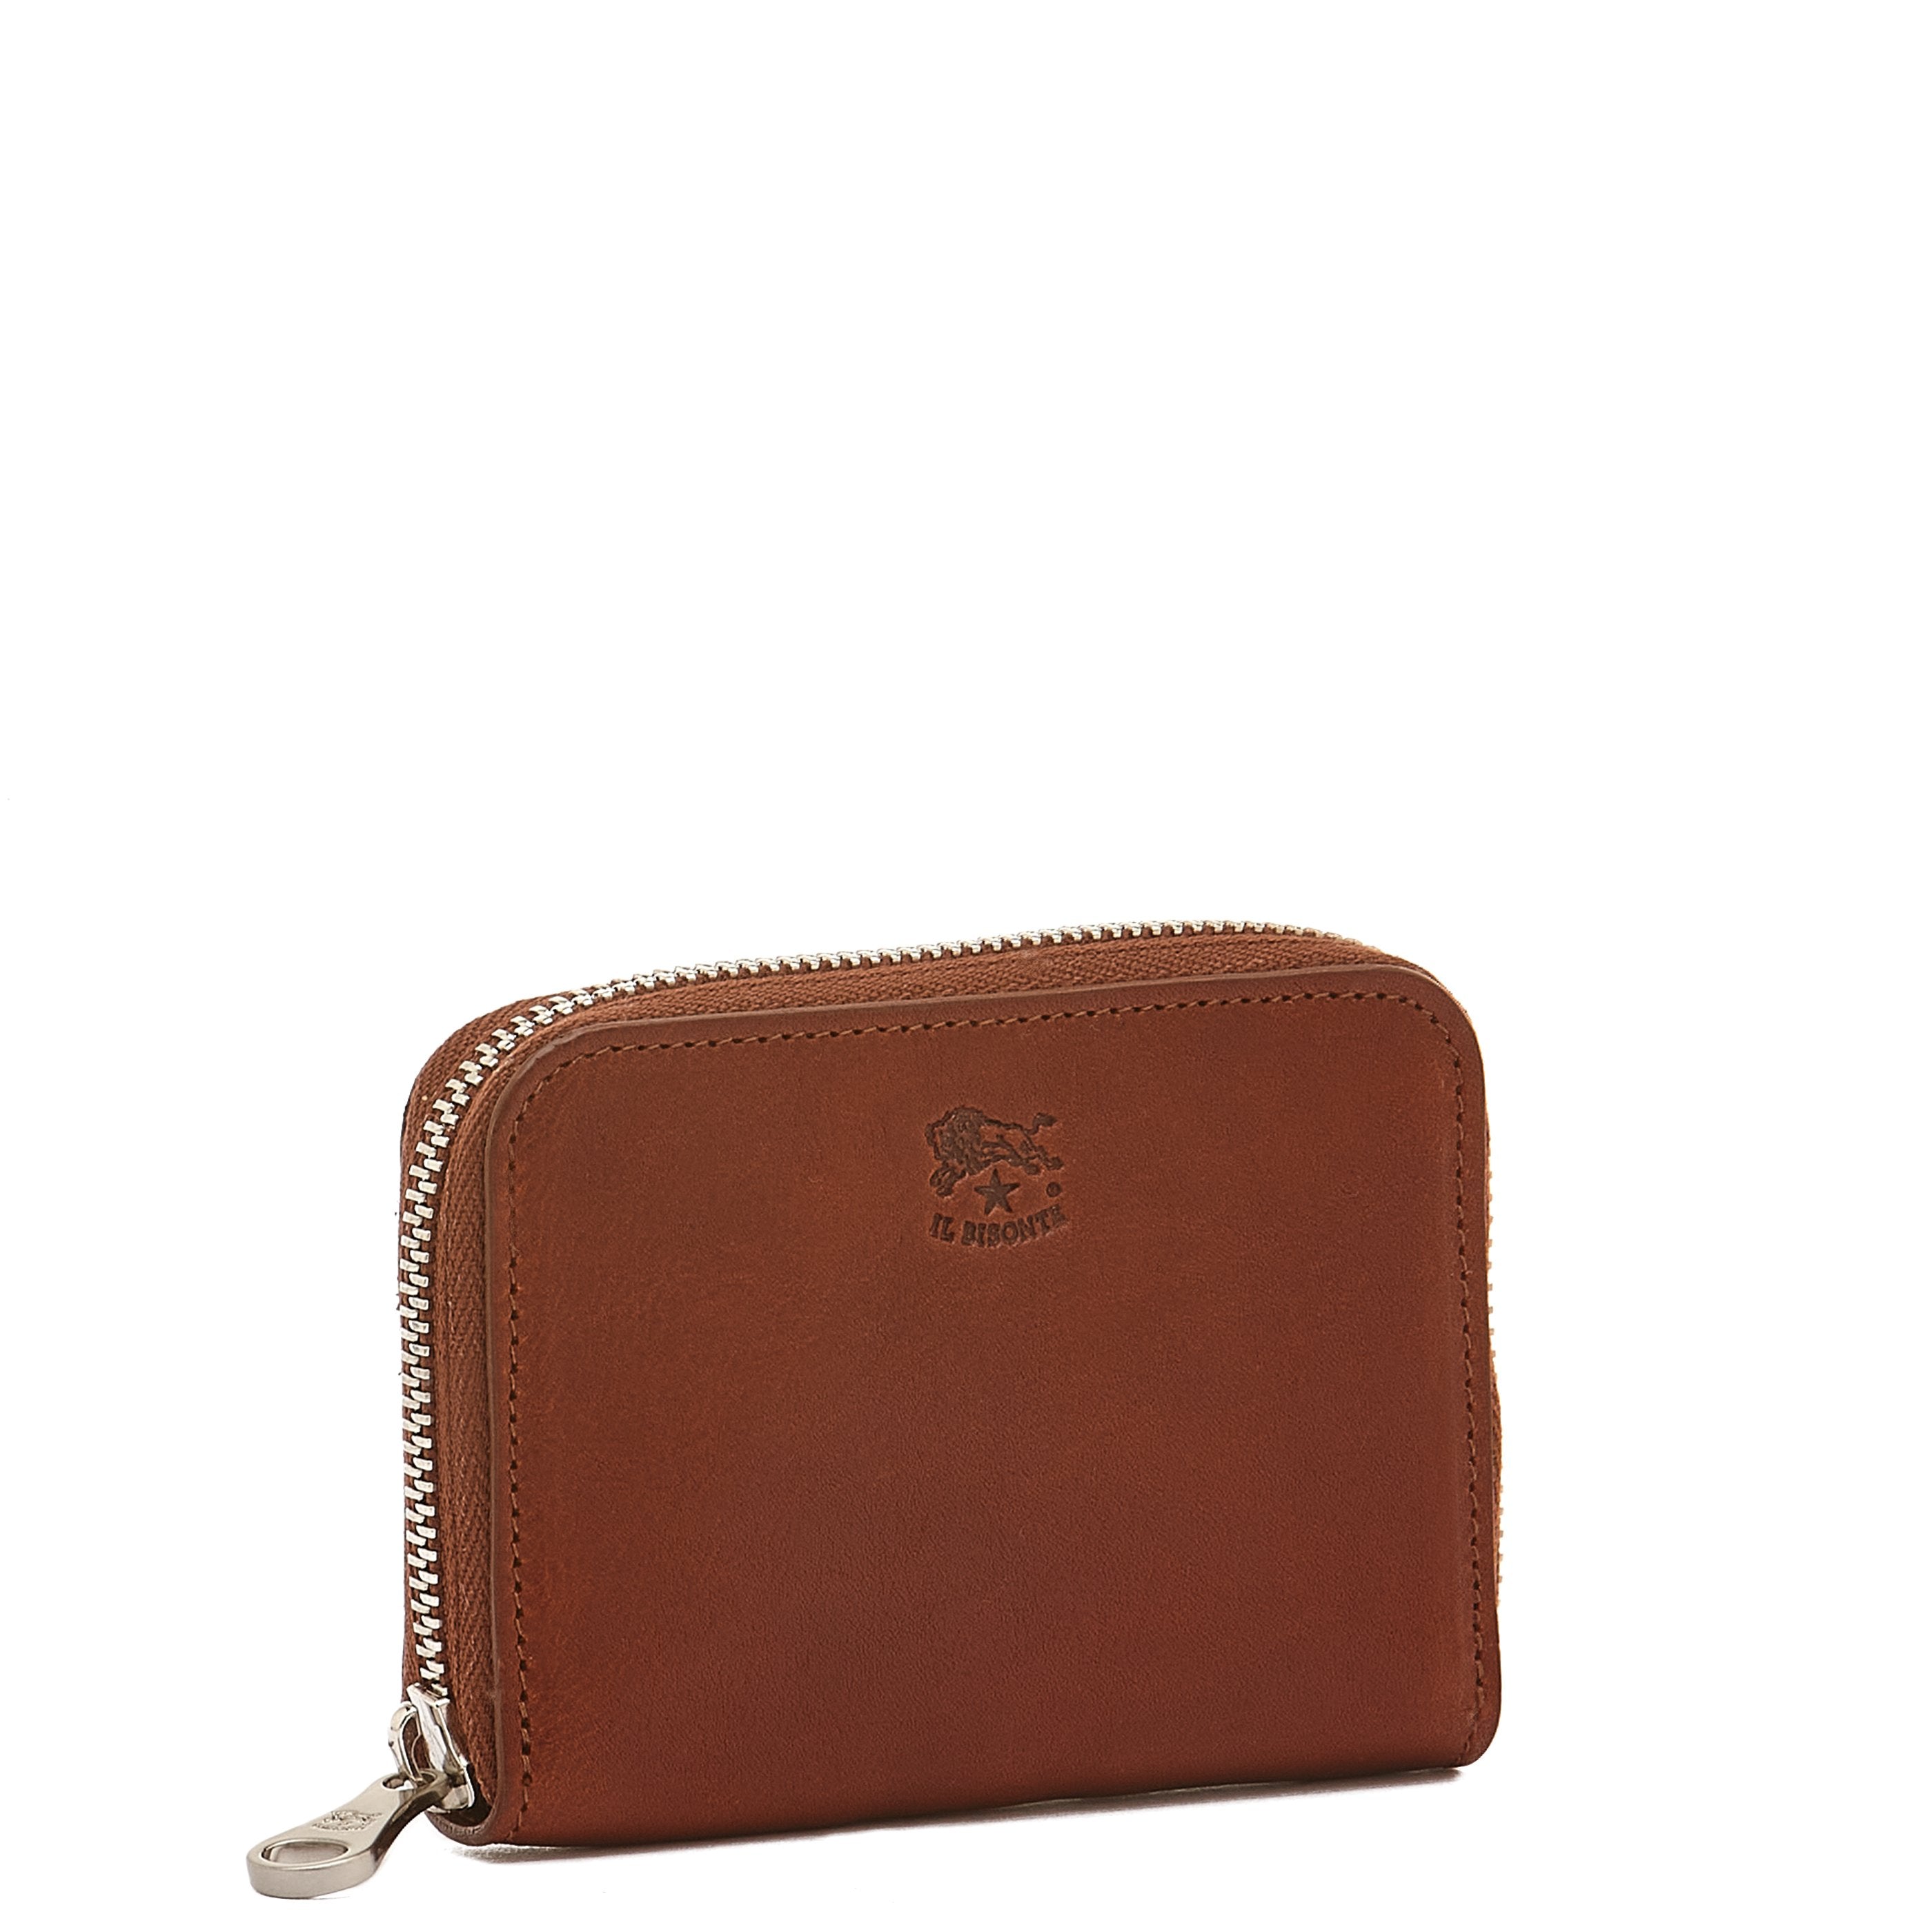 Convertible FAT Leather Pouch - Innovative Journaling